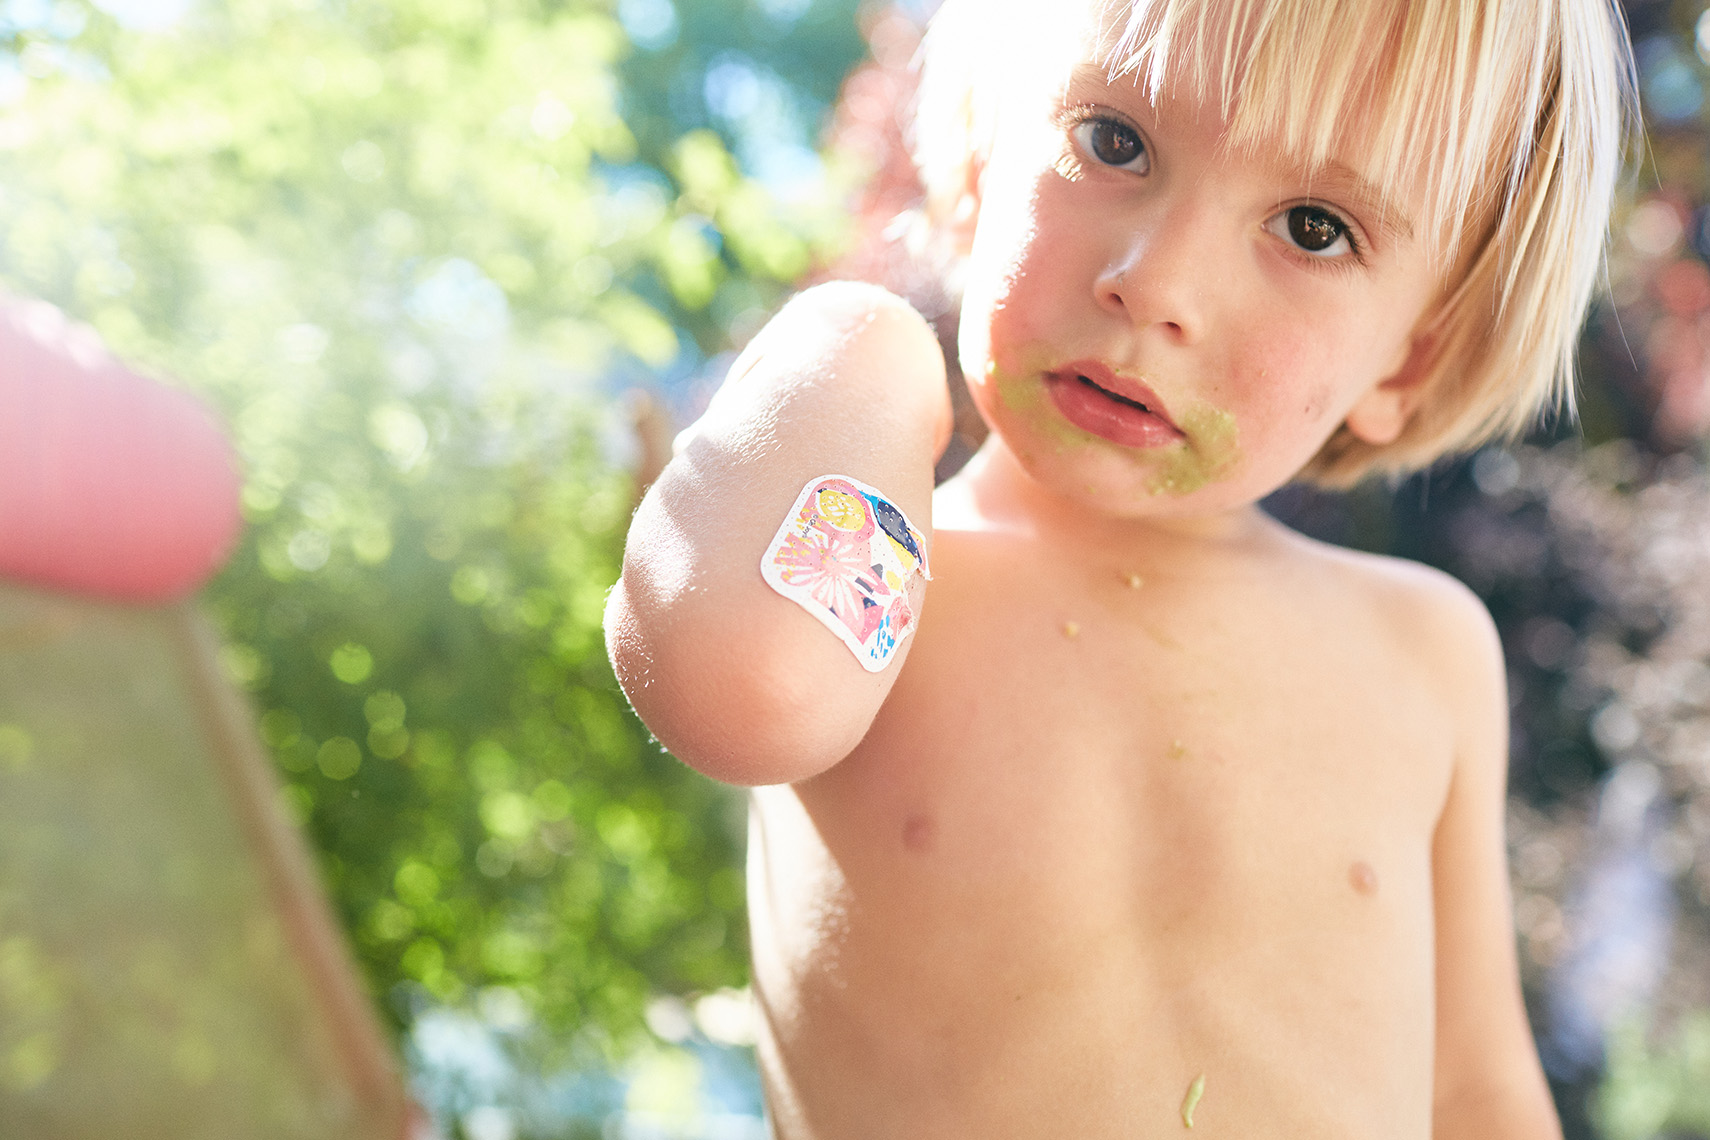 A young kiddo shows their bandaid. Lifestyle photo by Leah Verwey